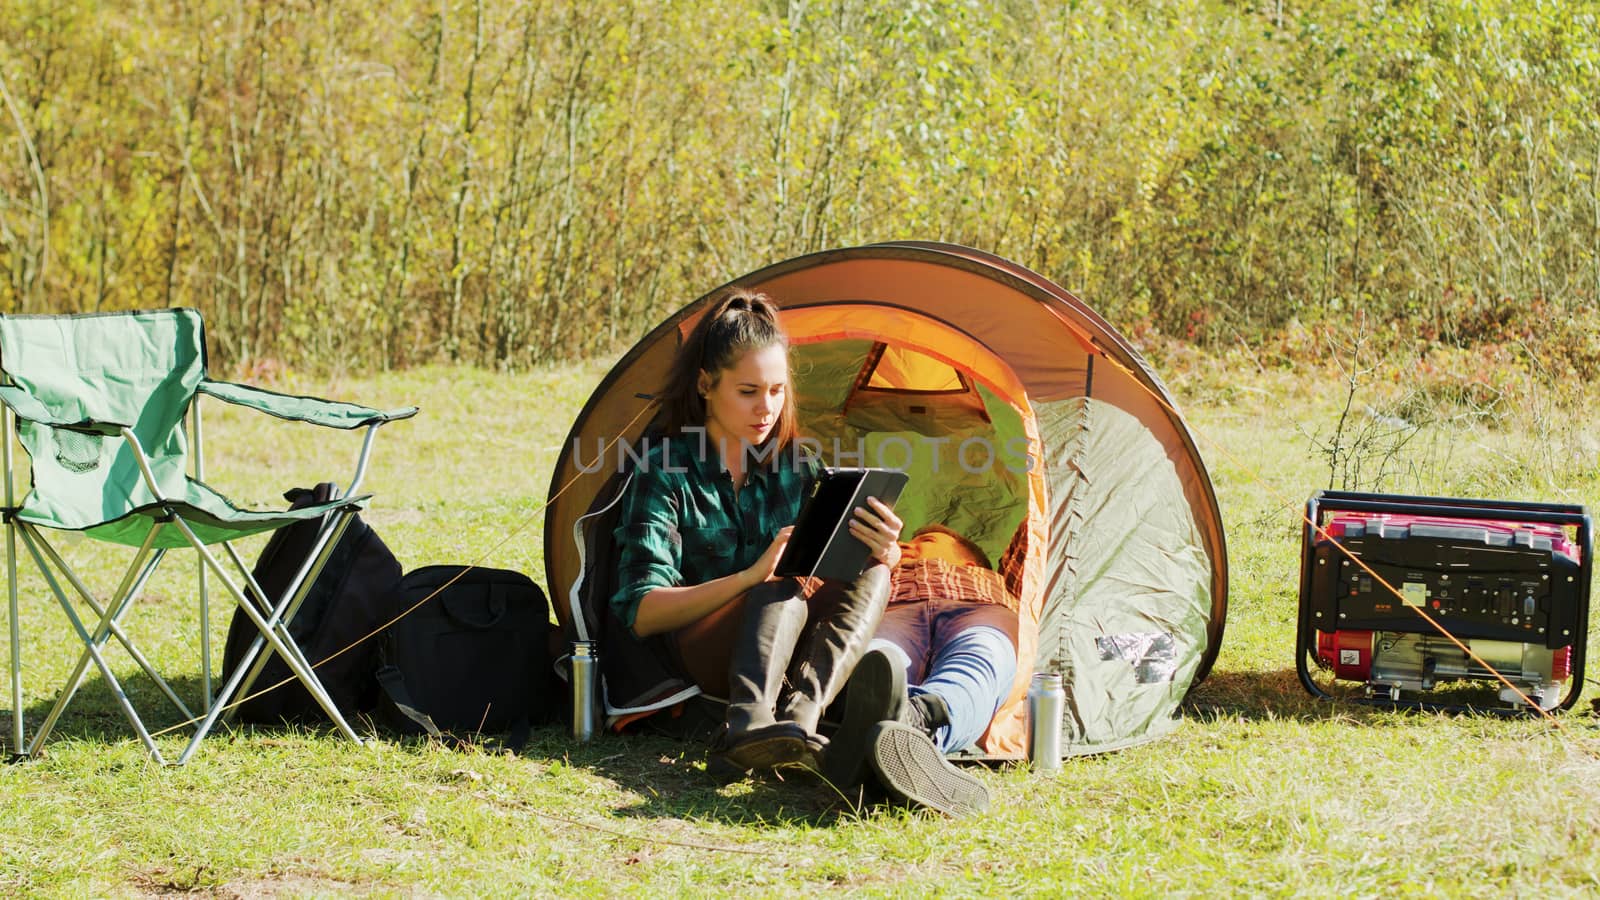 Beautiful young girlfriend using her tablet in front of camping tent while her boyfriend's relaxing inside the tent.